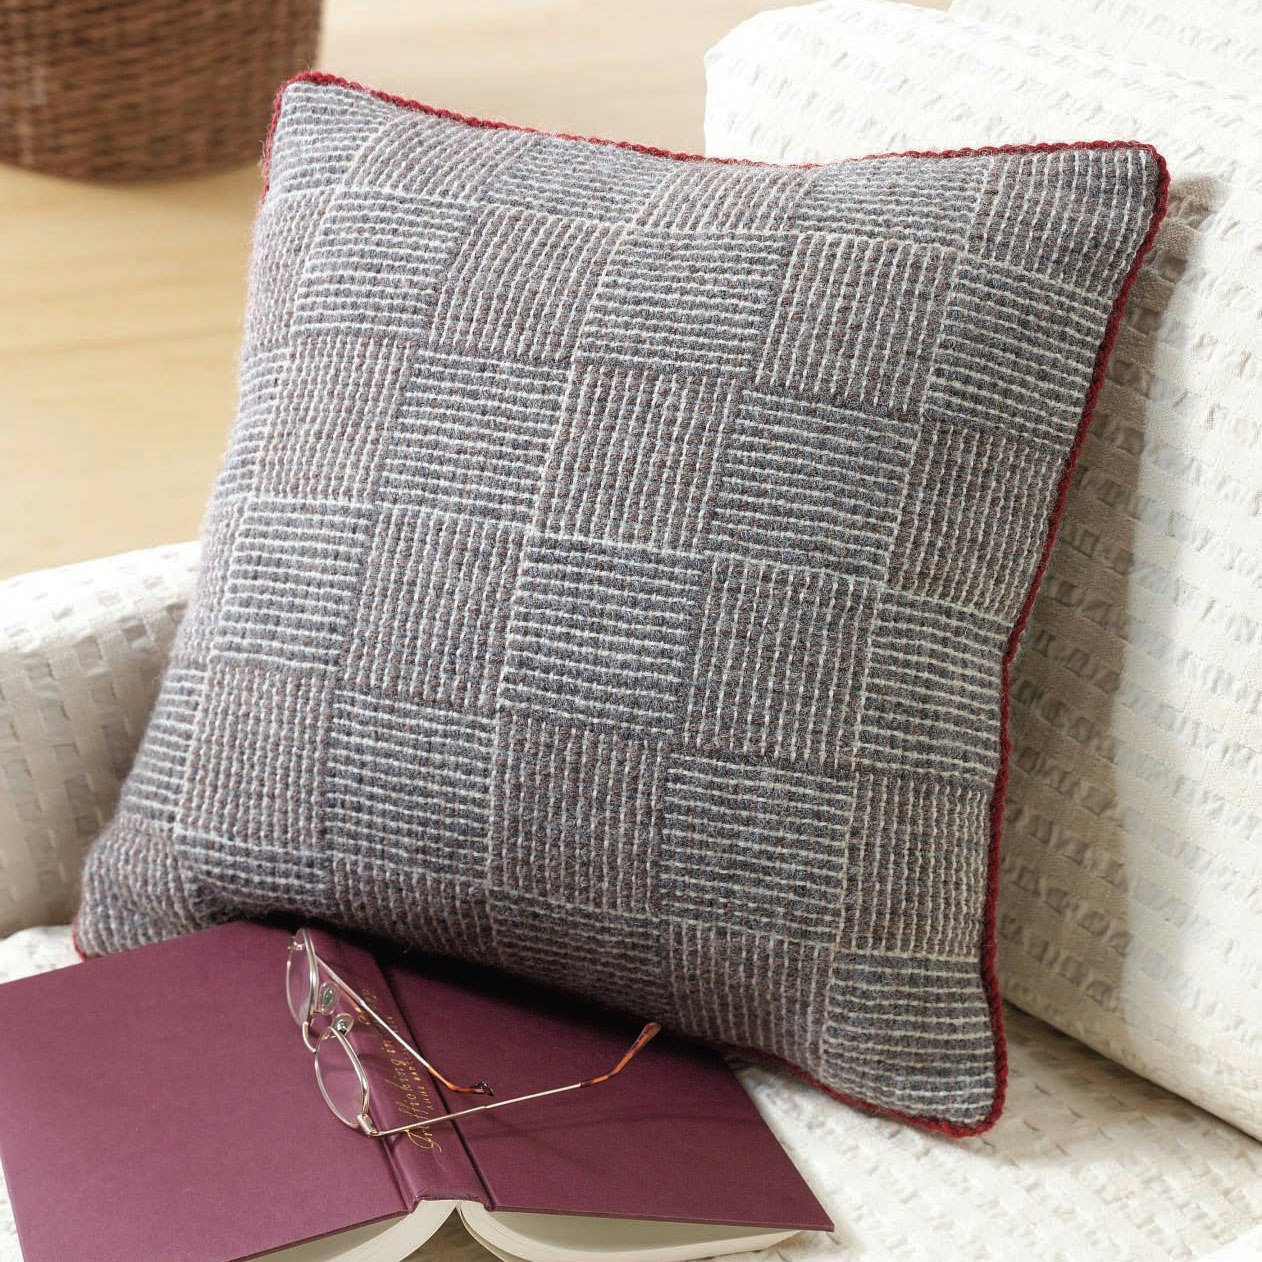 Pillow handwoven in log cabin with natural-colored wool